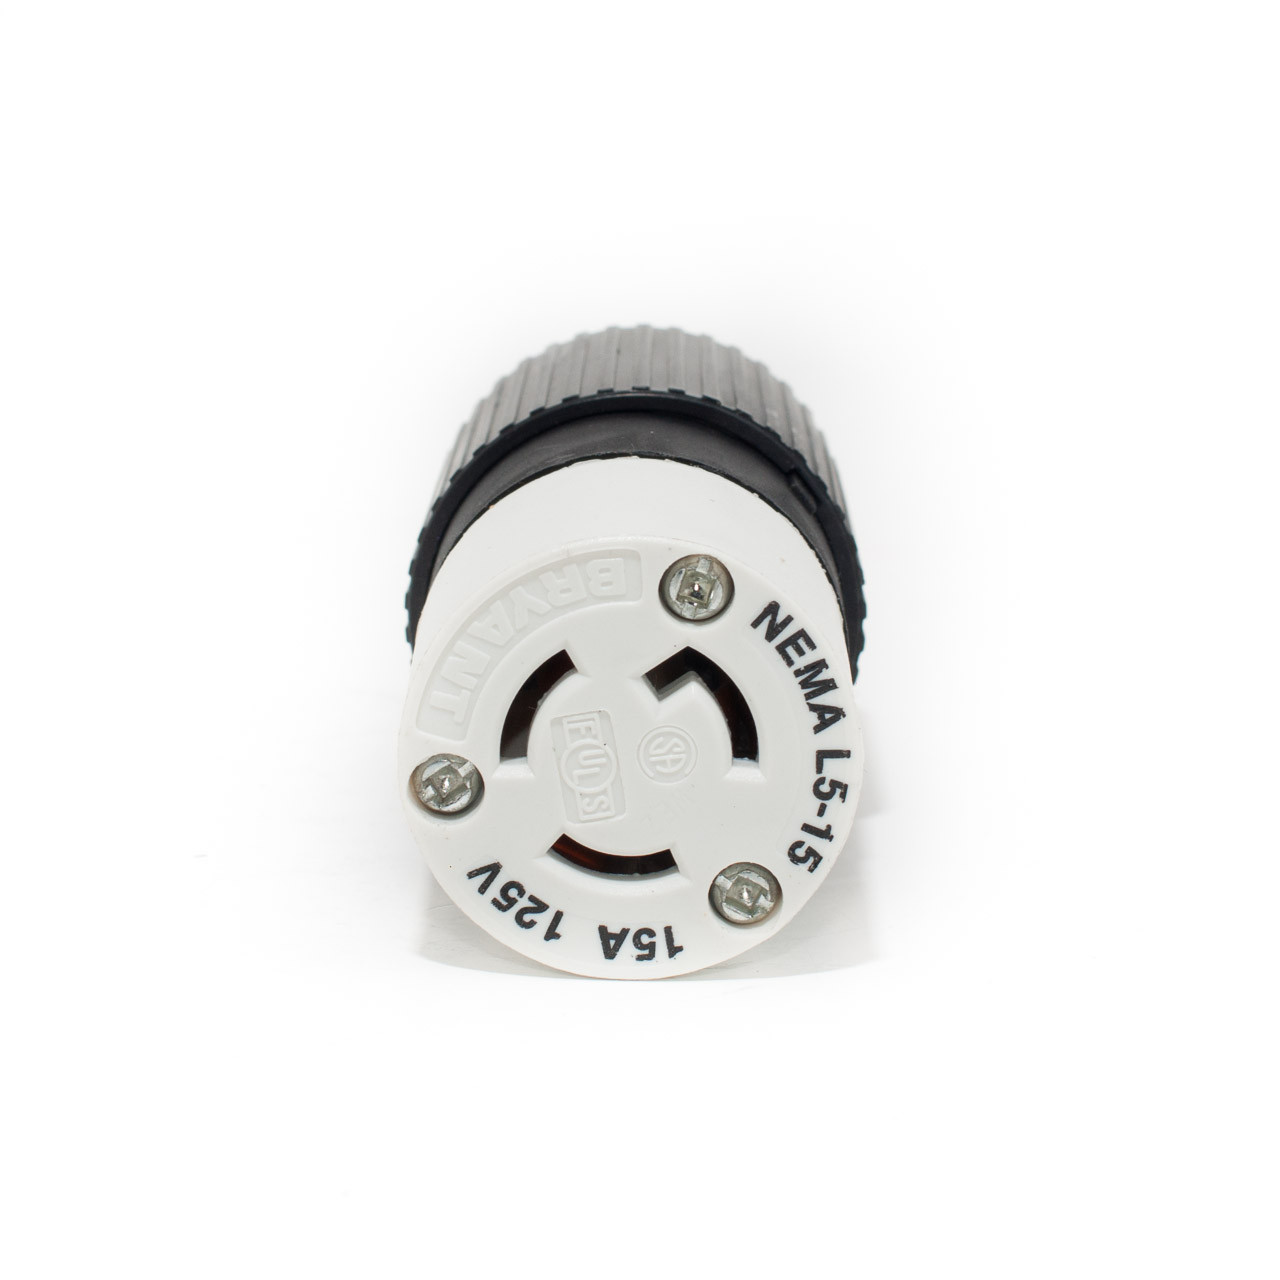 L5-15 2P3W 15A 125V Twist Lock Connector - TremTech Electrical Systems